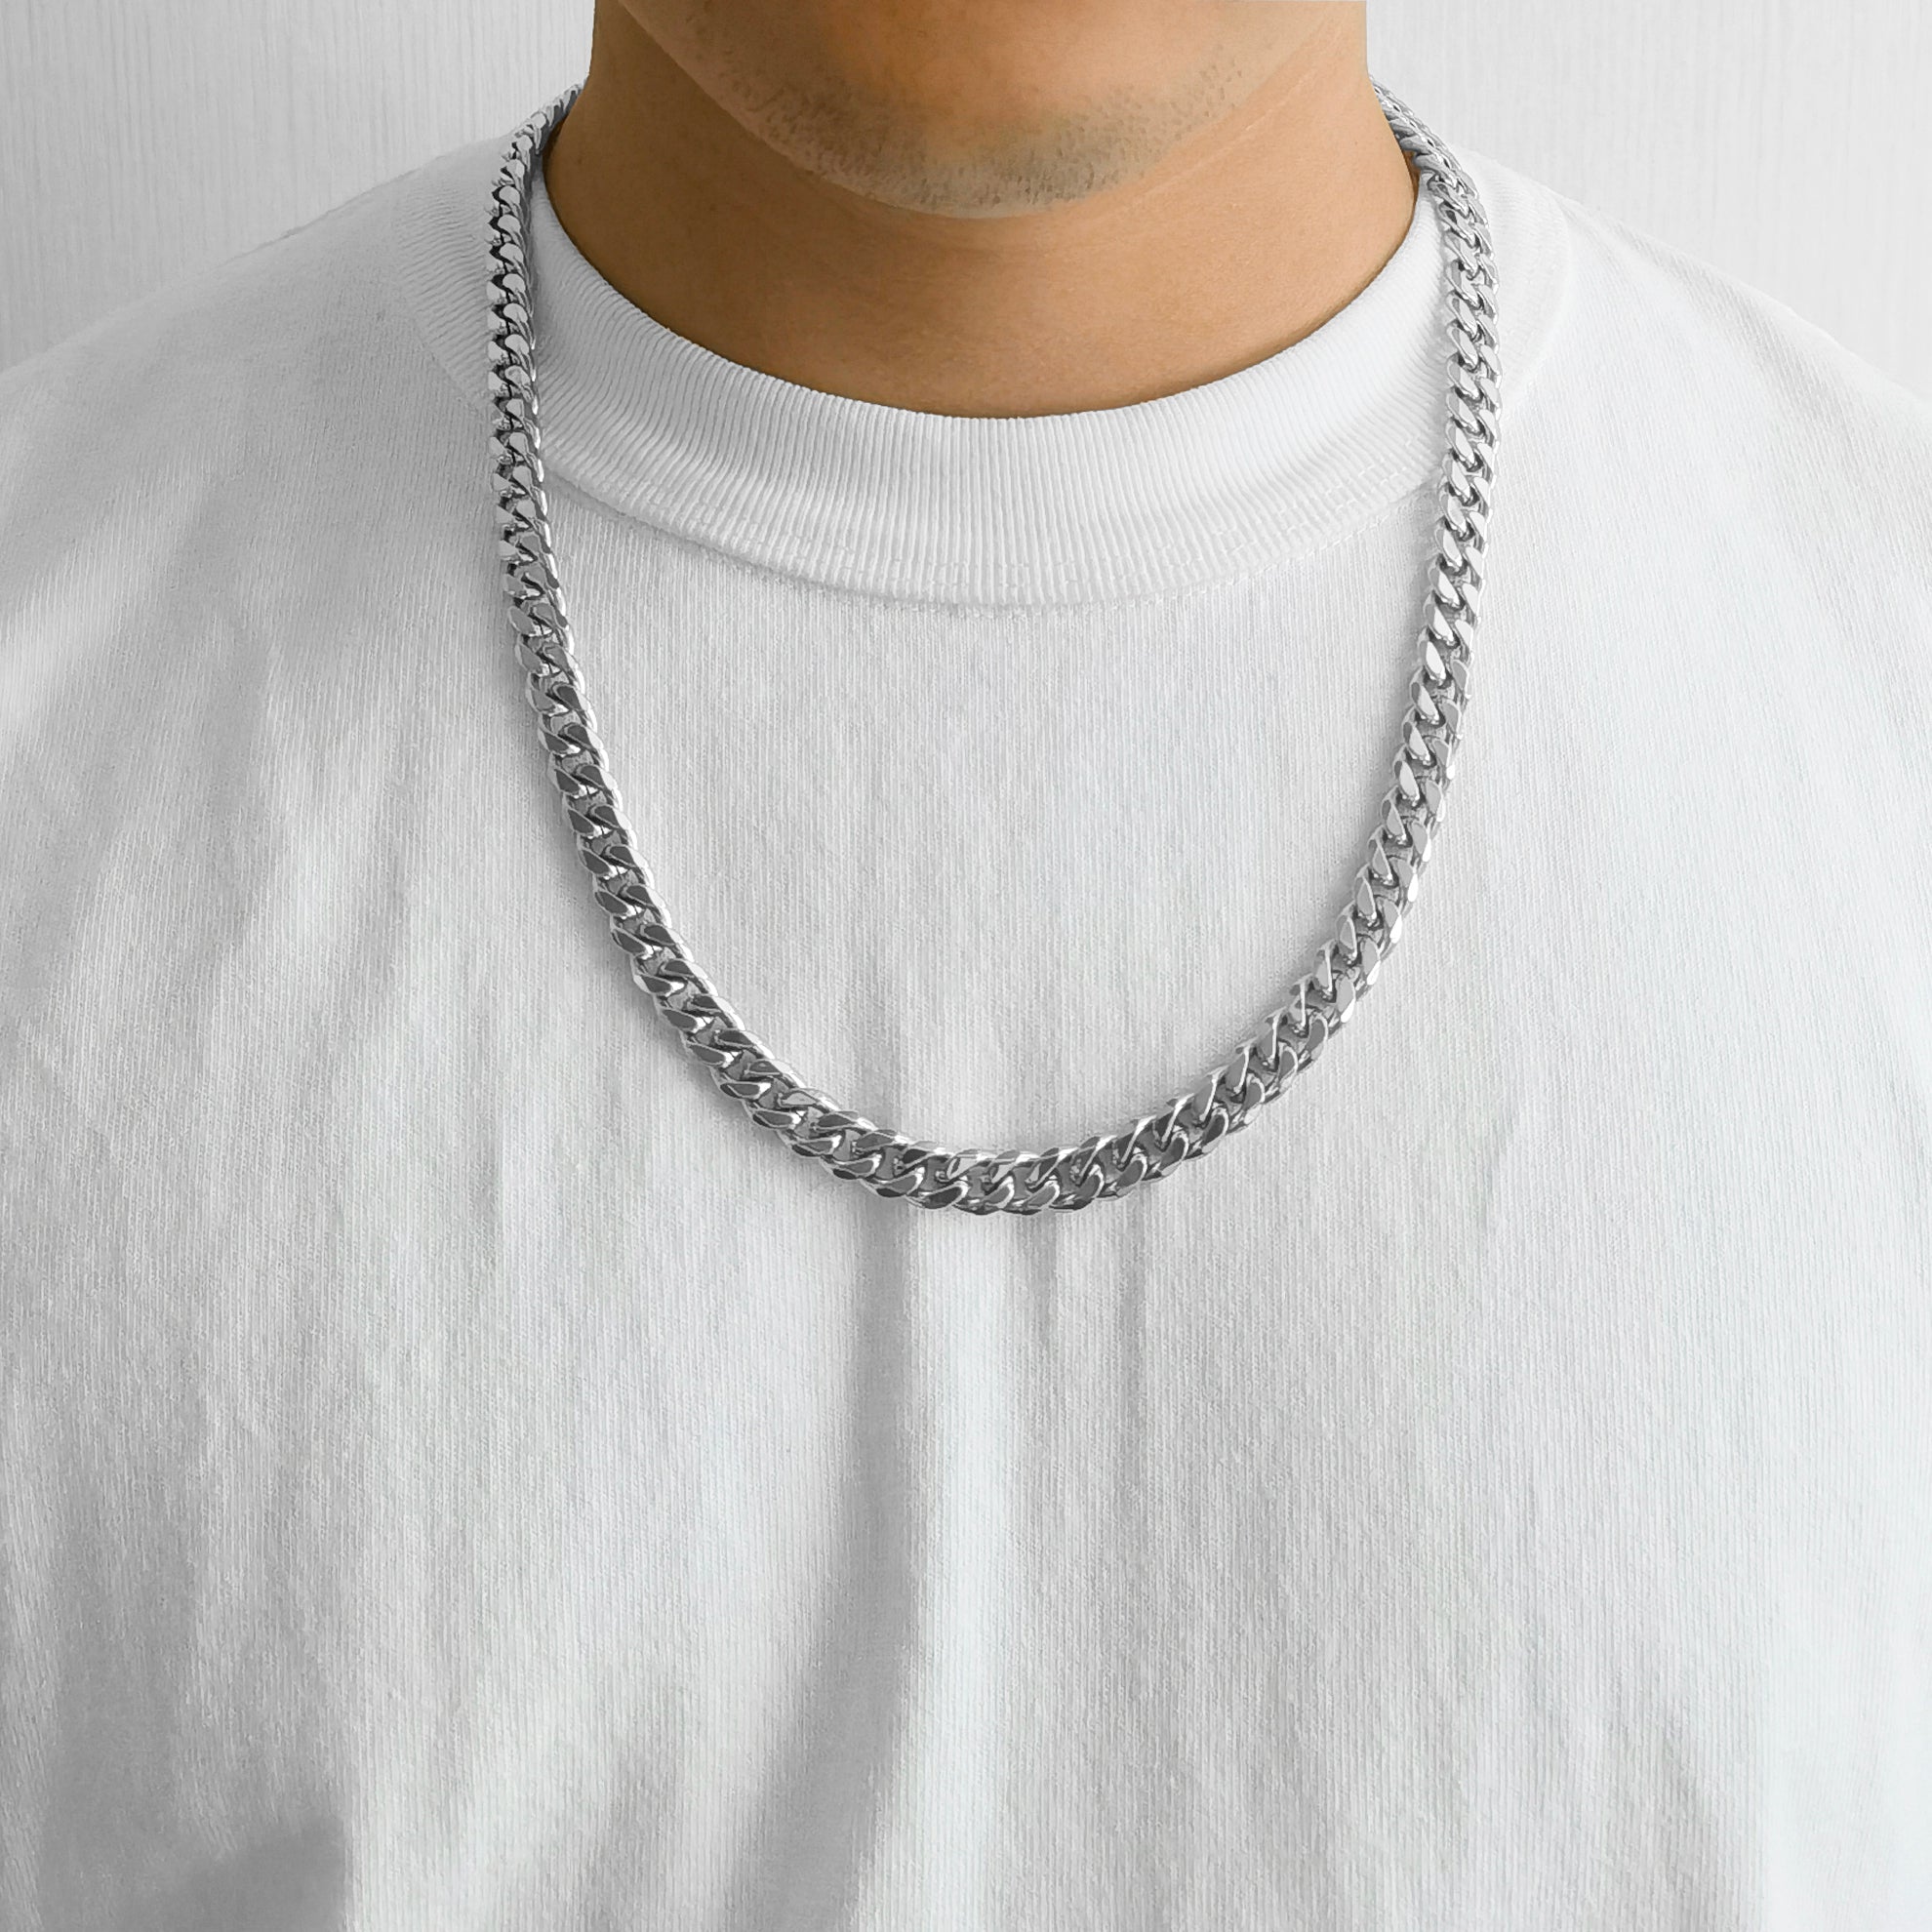 Men's 9mm Stainless Steel 18-24 Inch Curb Chain Necklace